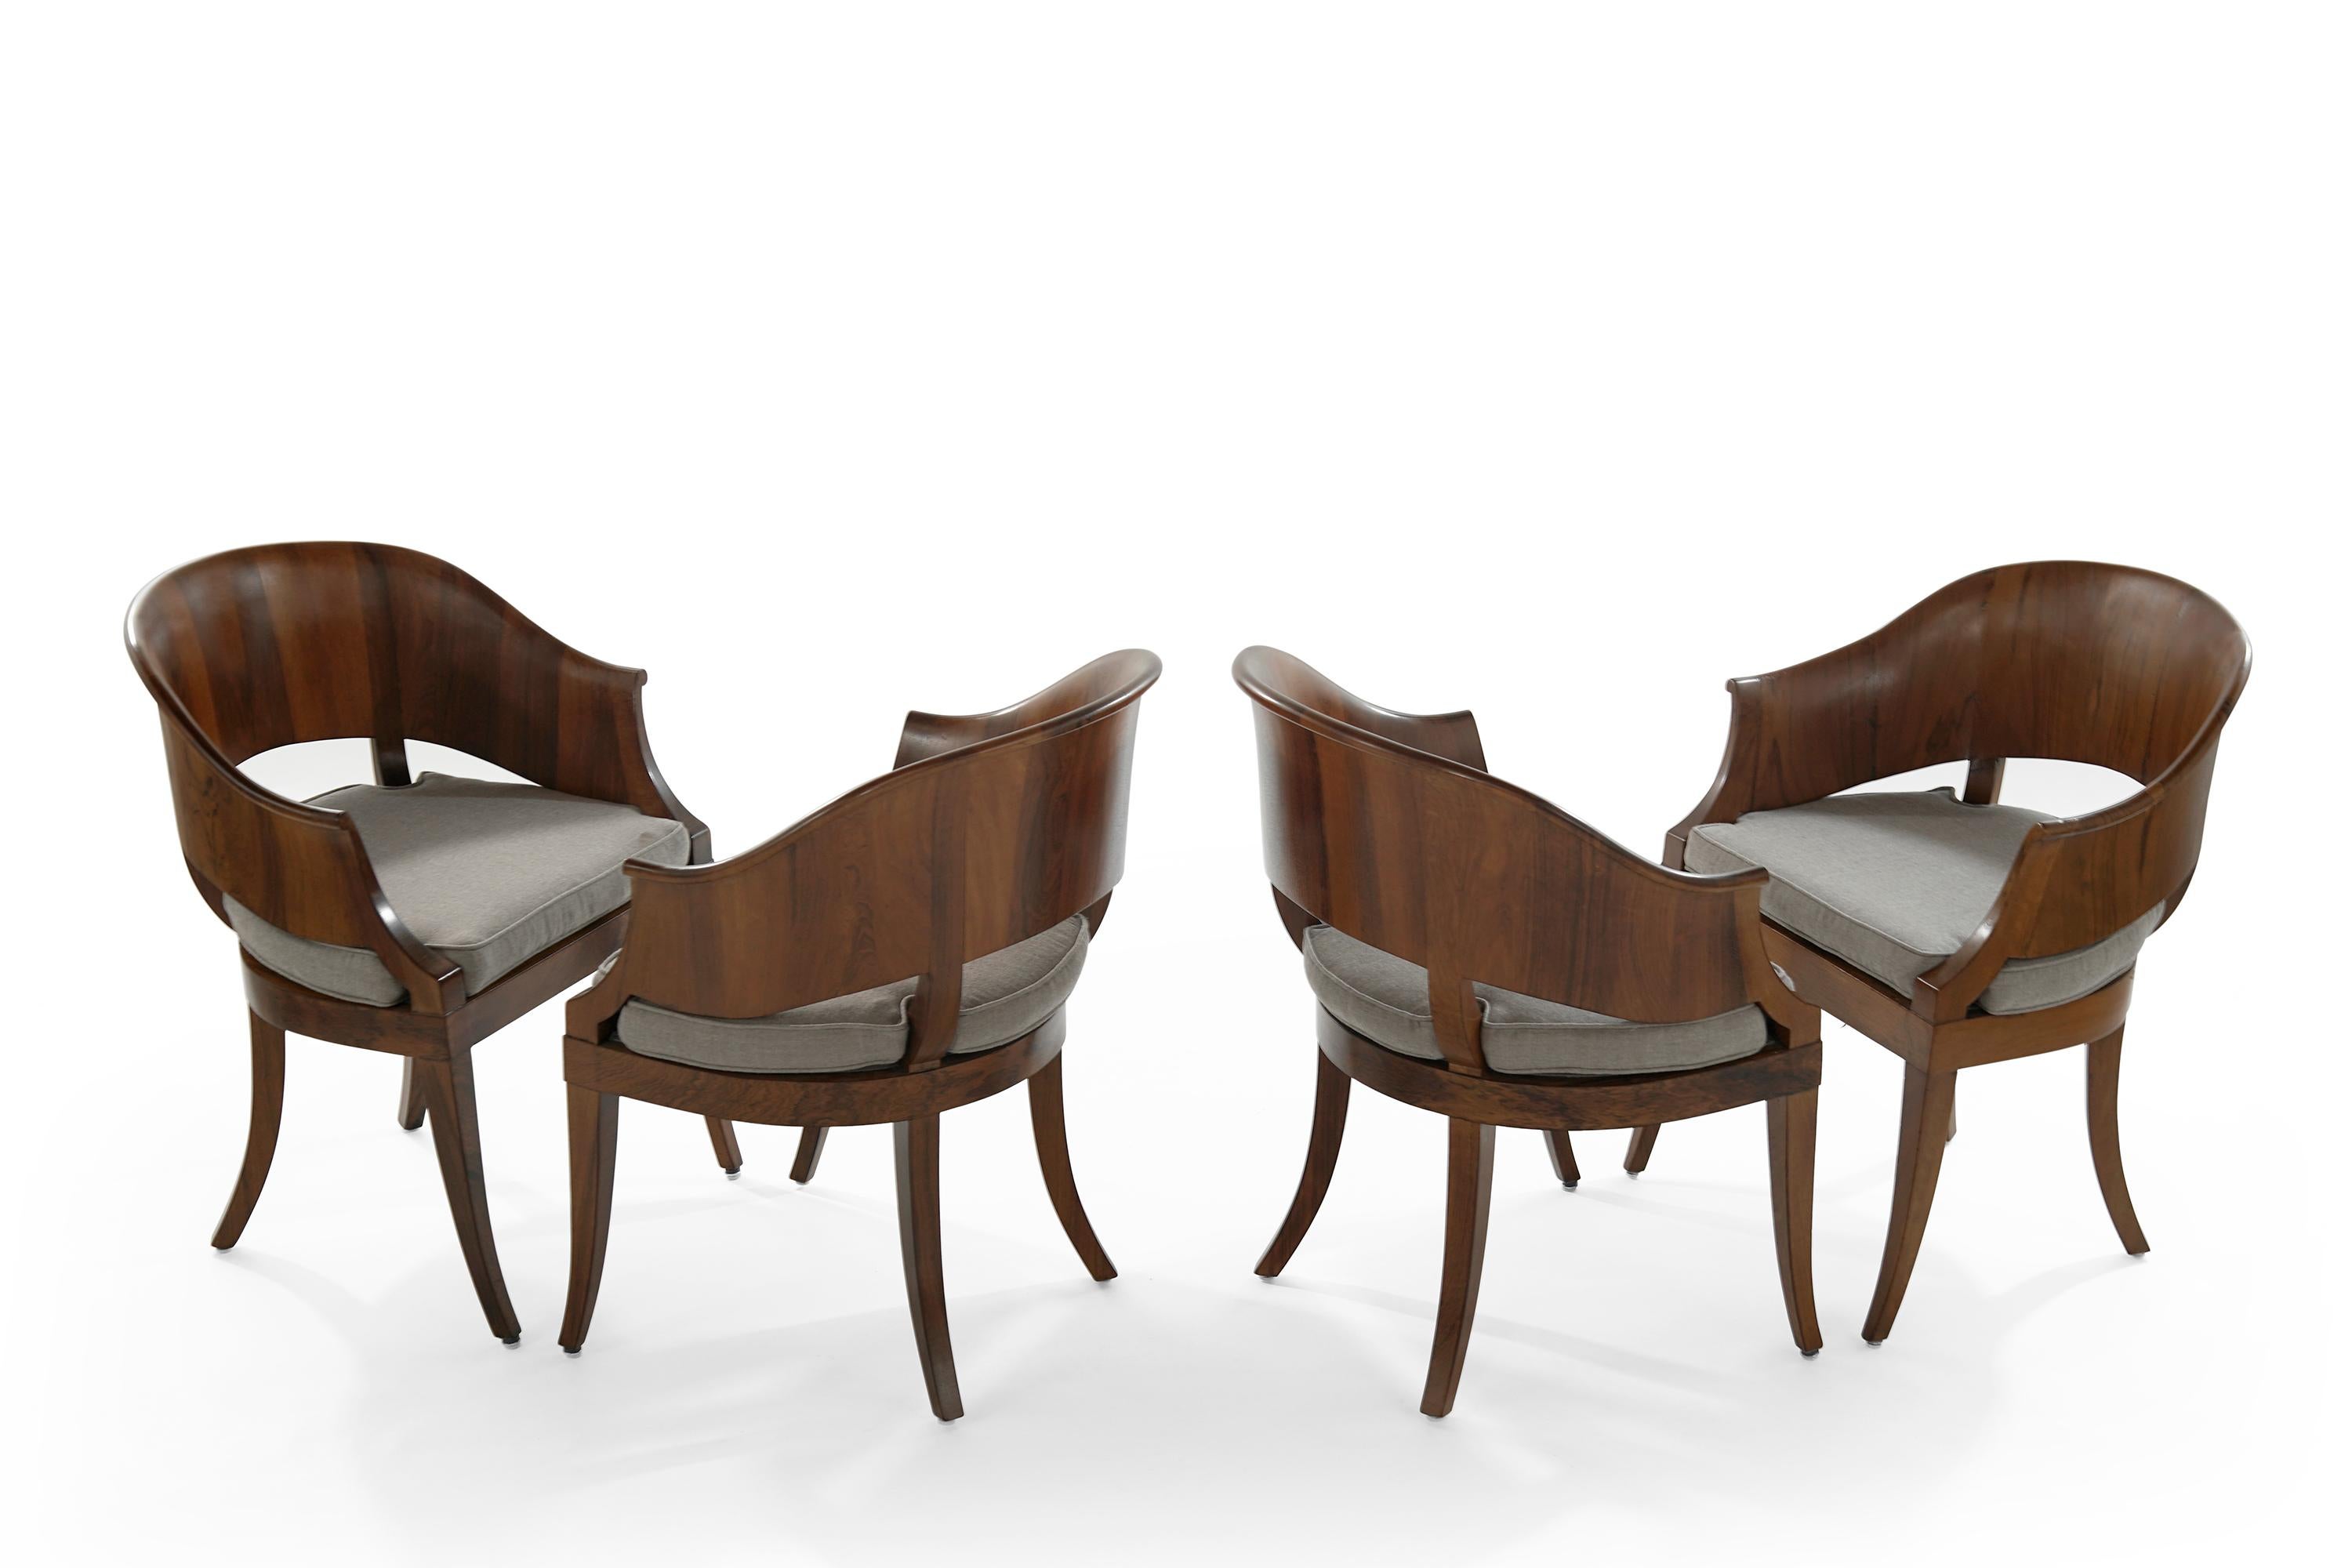 Set of four art deco style hand sculptured walnut armchairs. Walnut fully restored, newly linen upholstered cushions.